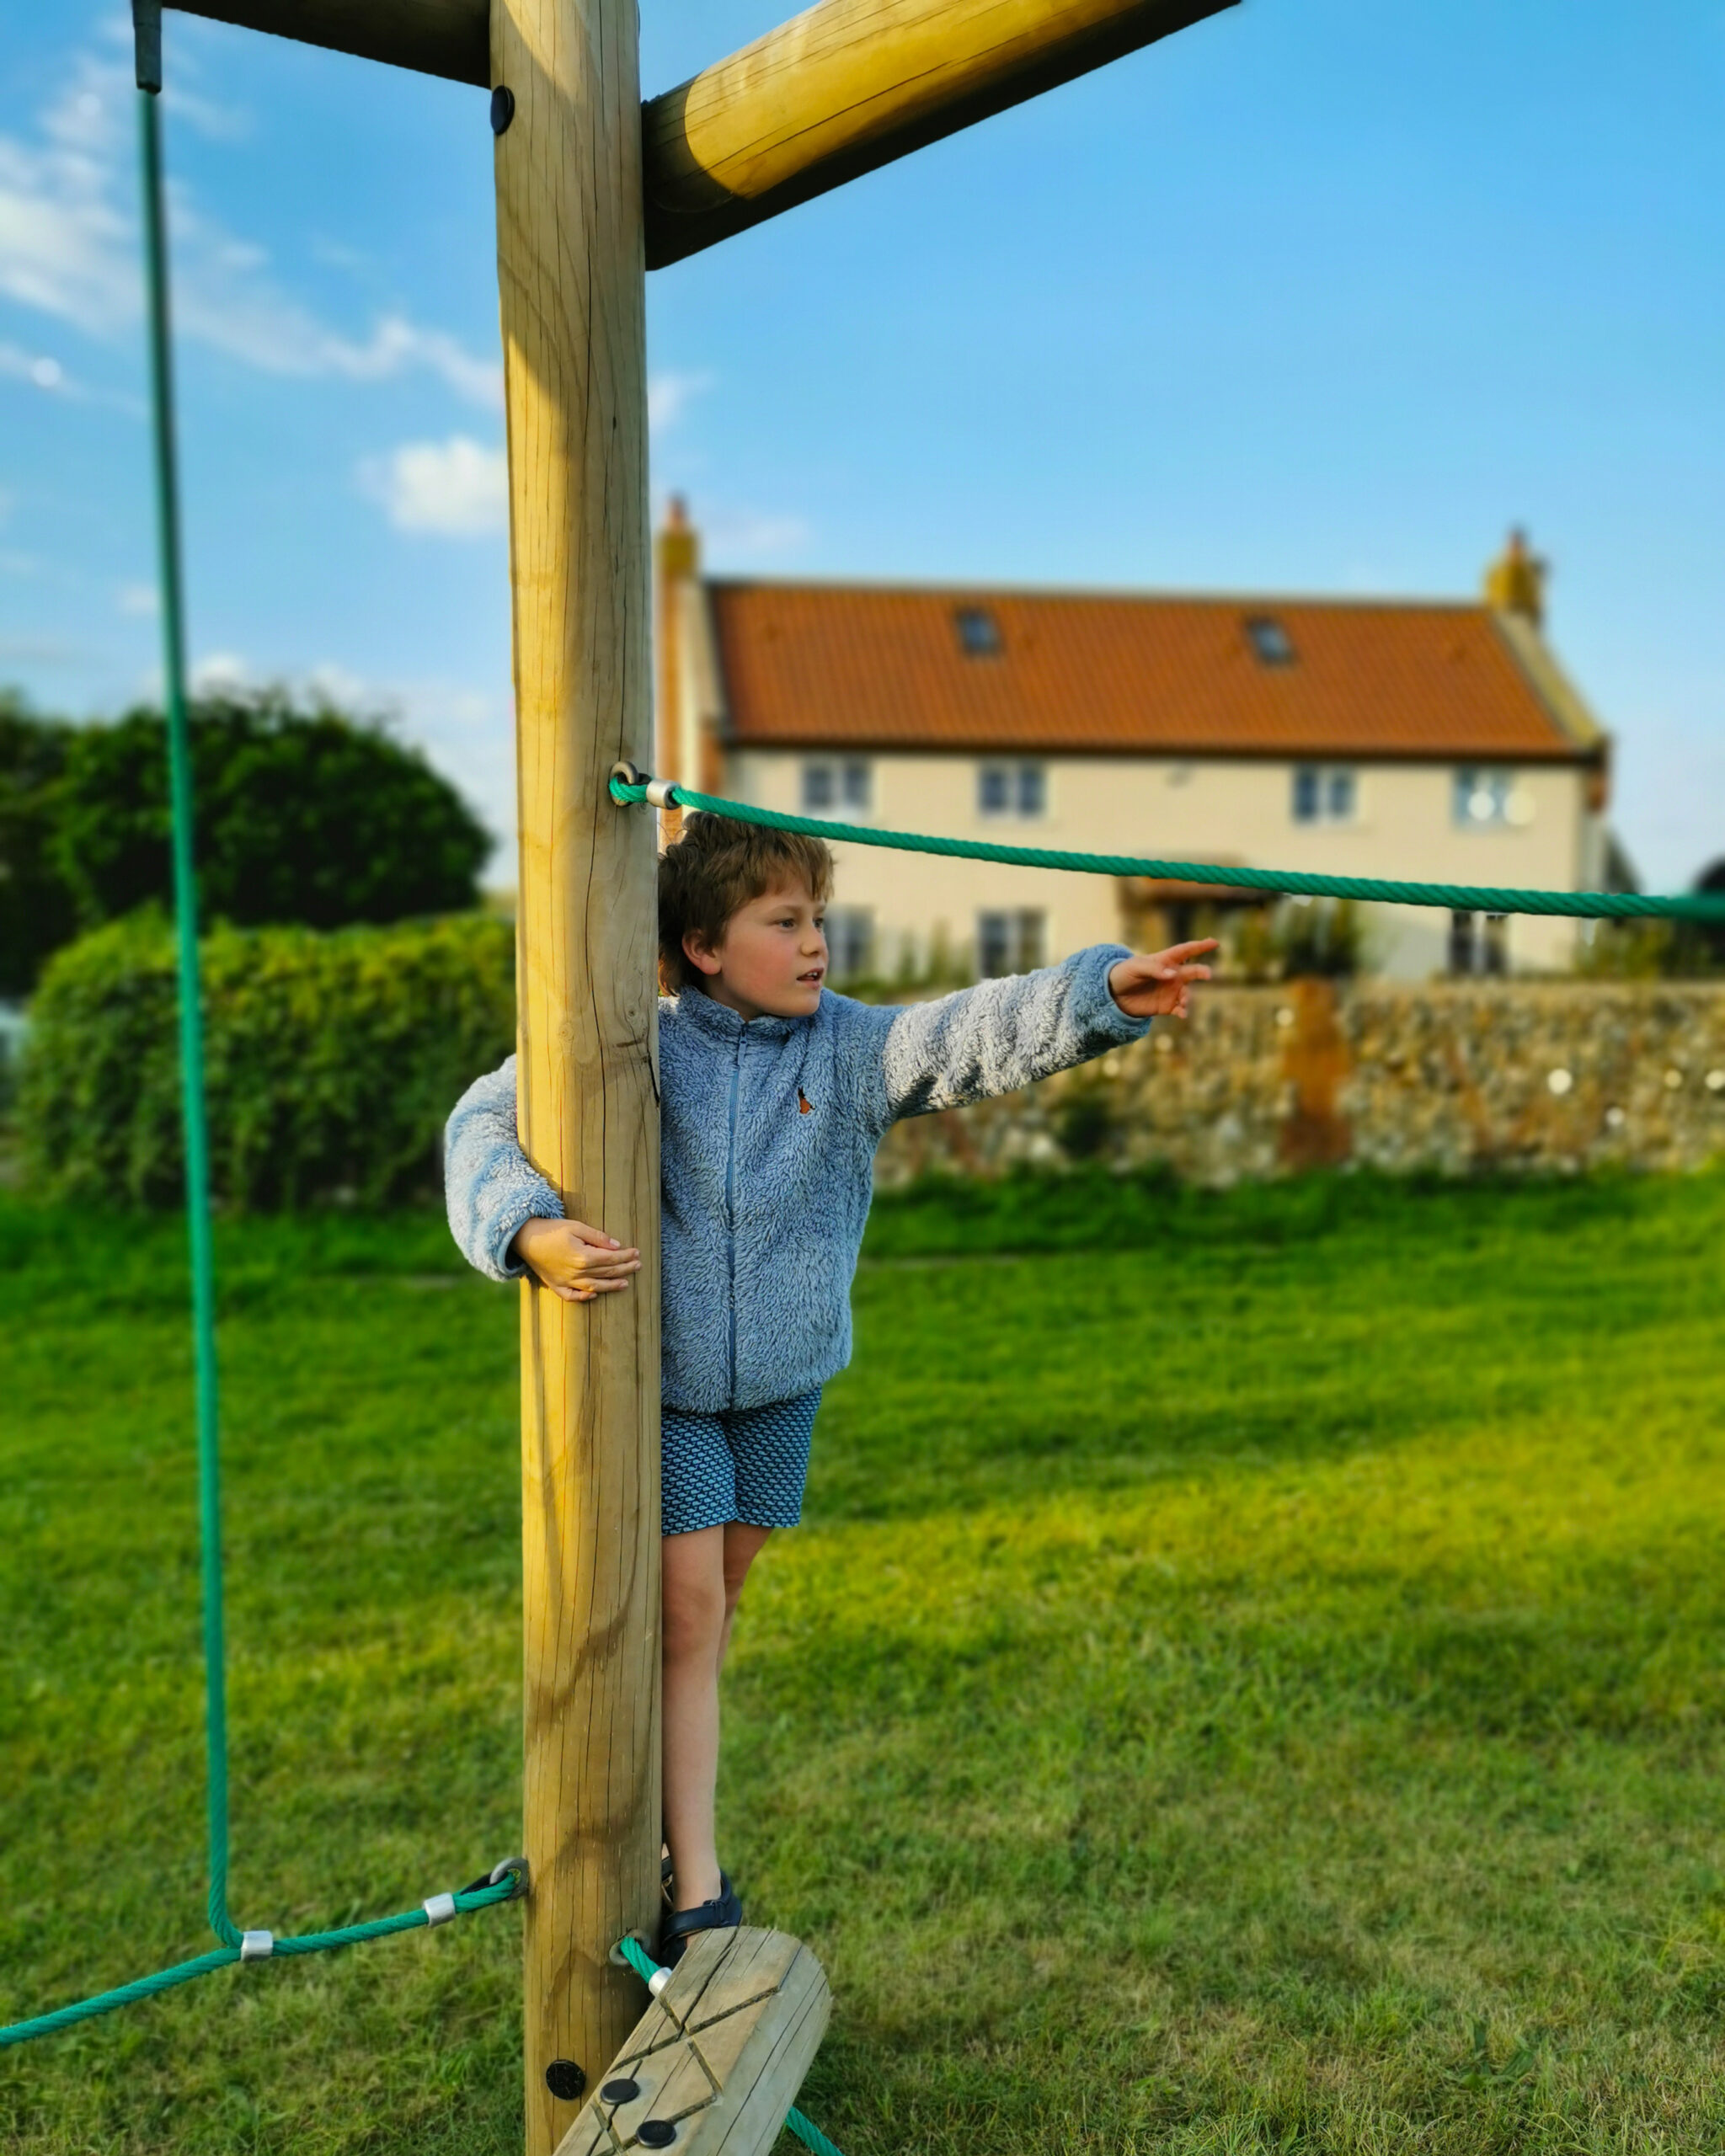 Lovat Parks Holidays, Waxham Sands Holiday Park, Visit Norfolk, Family-Friendly, Luxury Holidays Park, Lodges, Family Staycation, Family Holiday, the Frenchie Mummy, Travel Reviews, Great Yarmouth, Norfolk Beach, Camping Sites